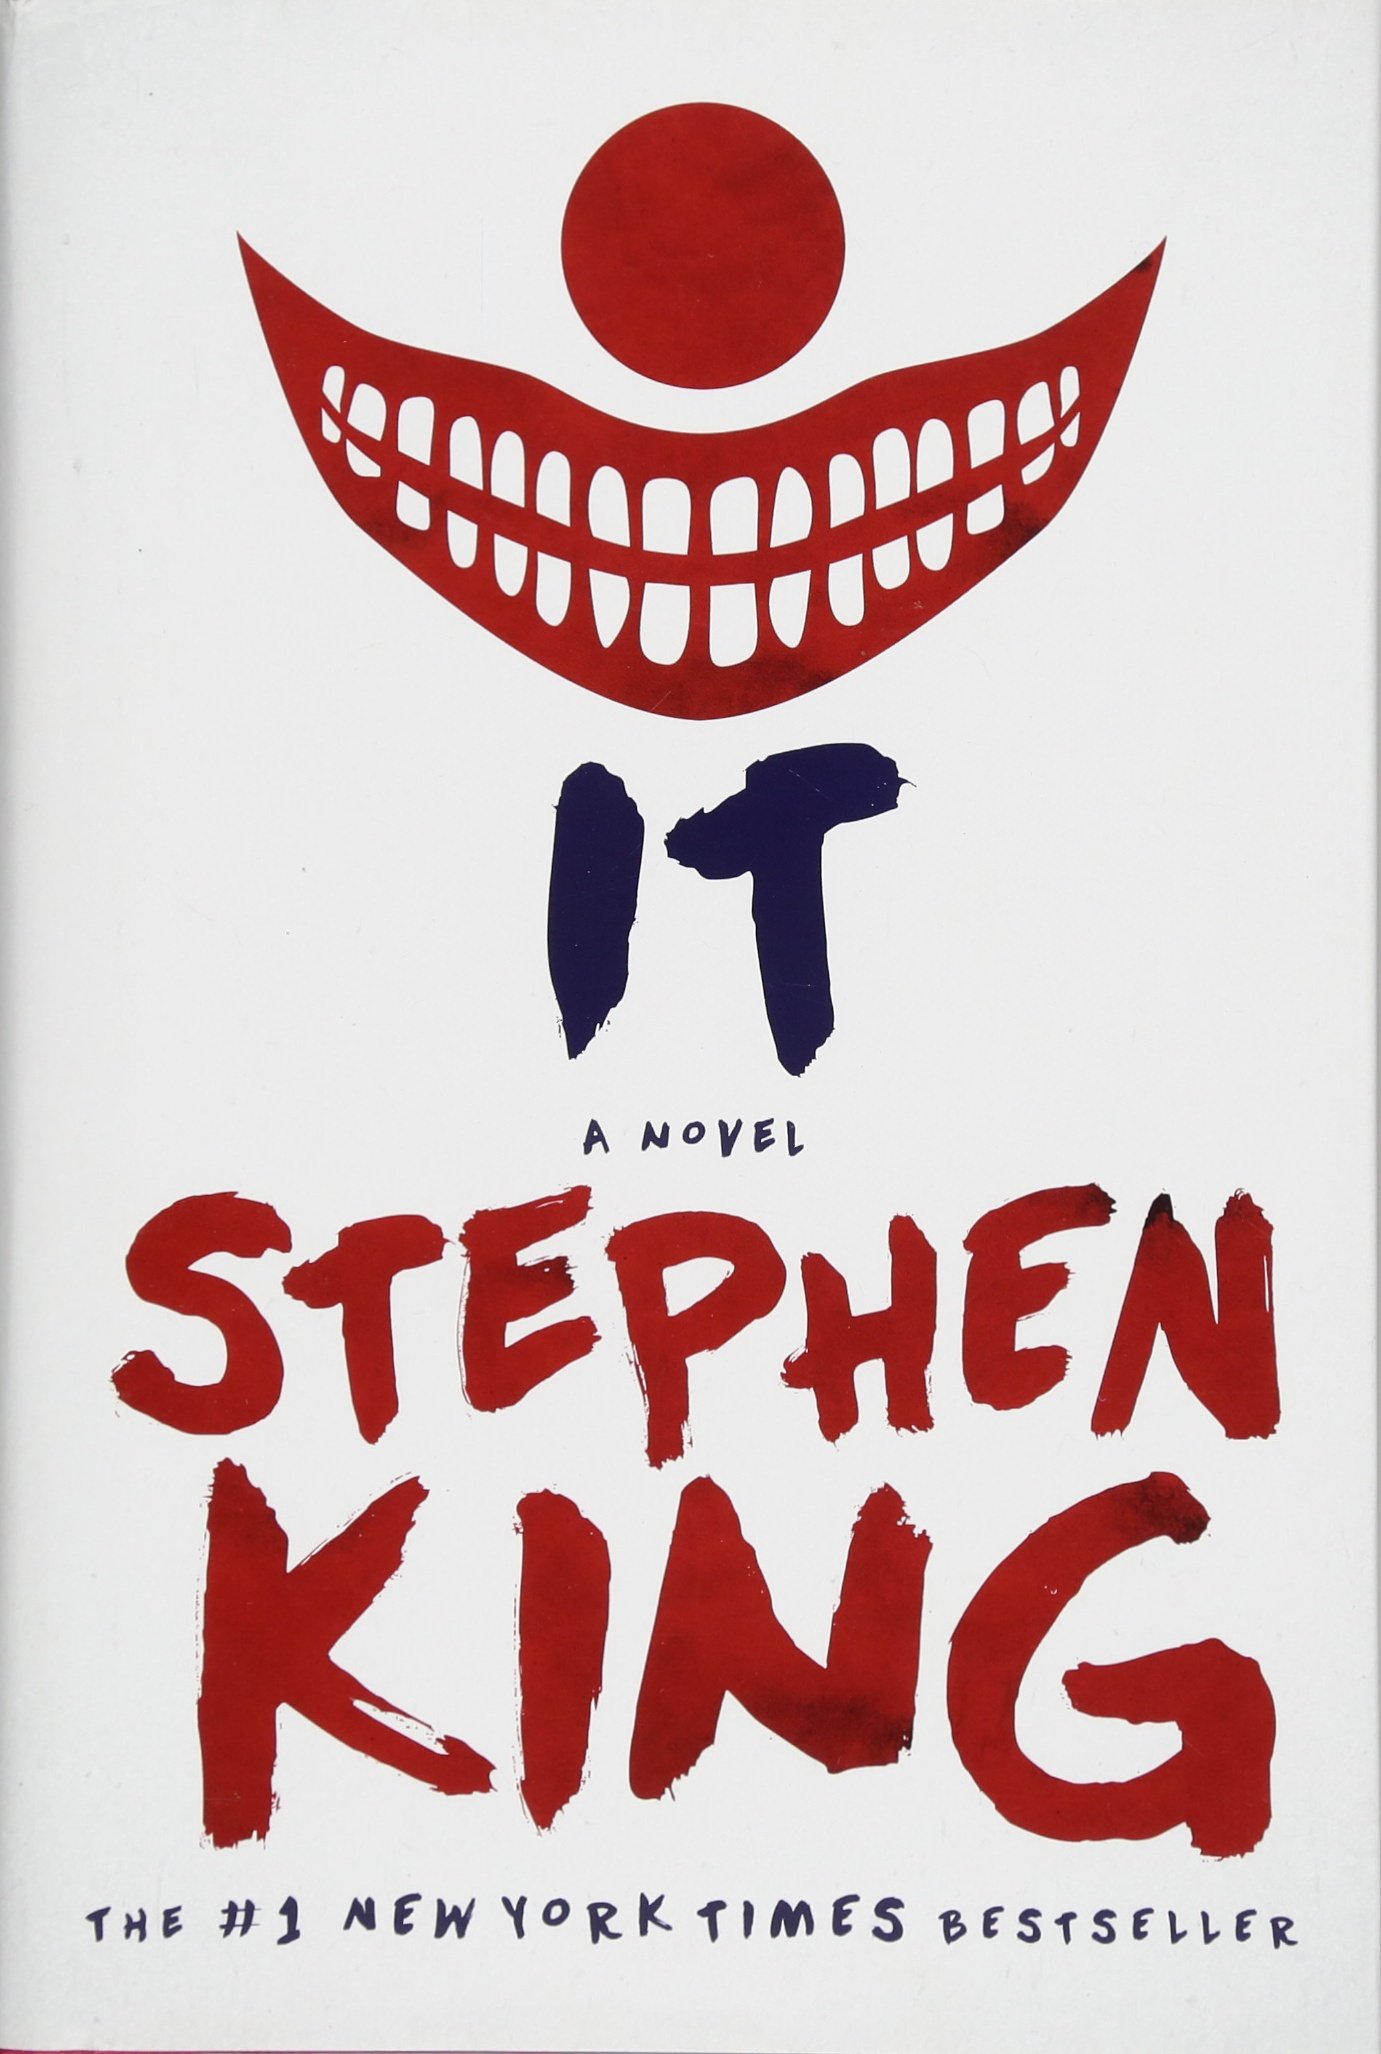 Red and white book cover for stephen king's novel "it," with a sinister smiling face and the title in bold letters, highlighting it as a #1 new york times bestseller.